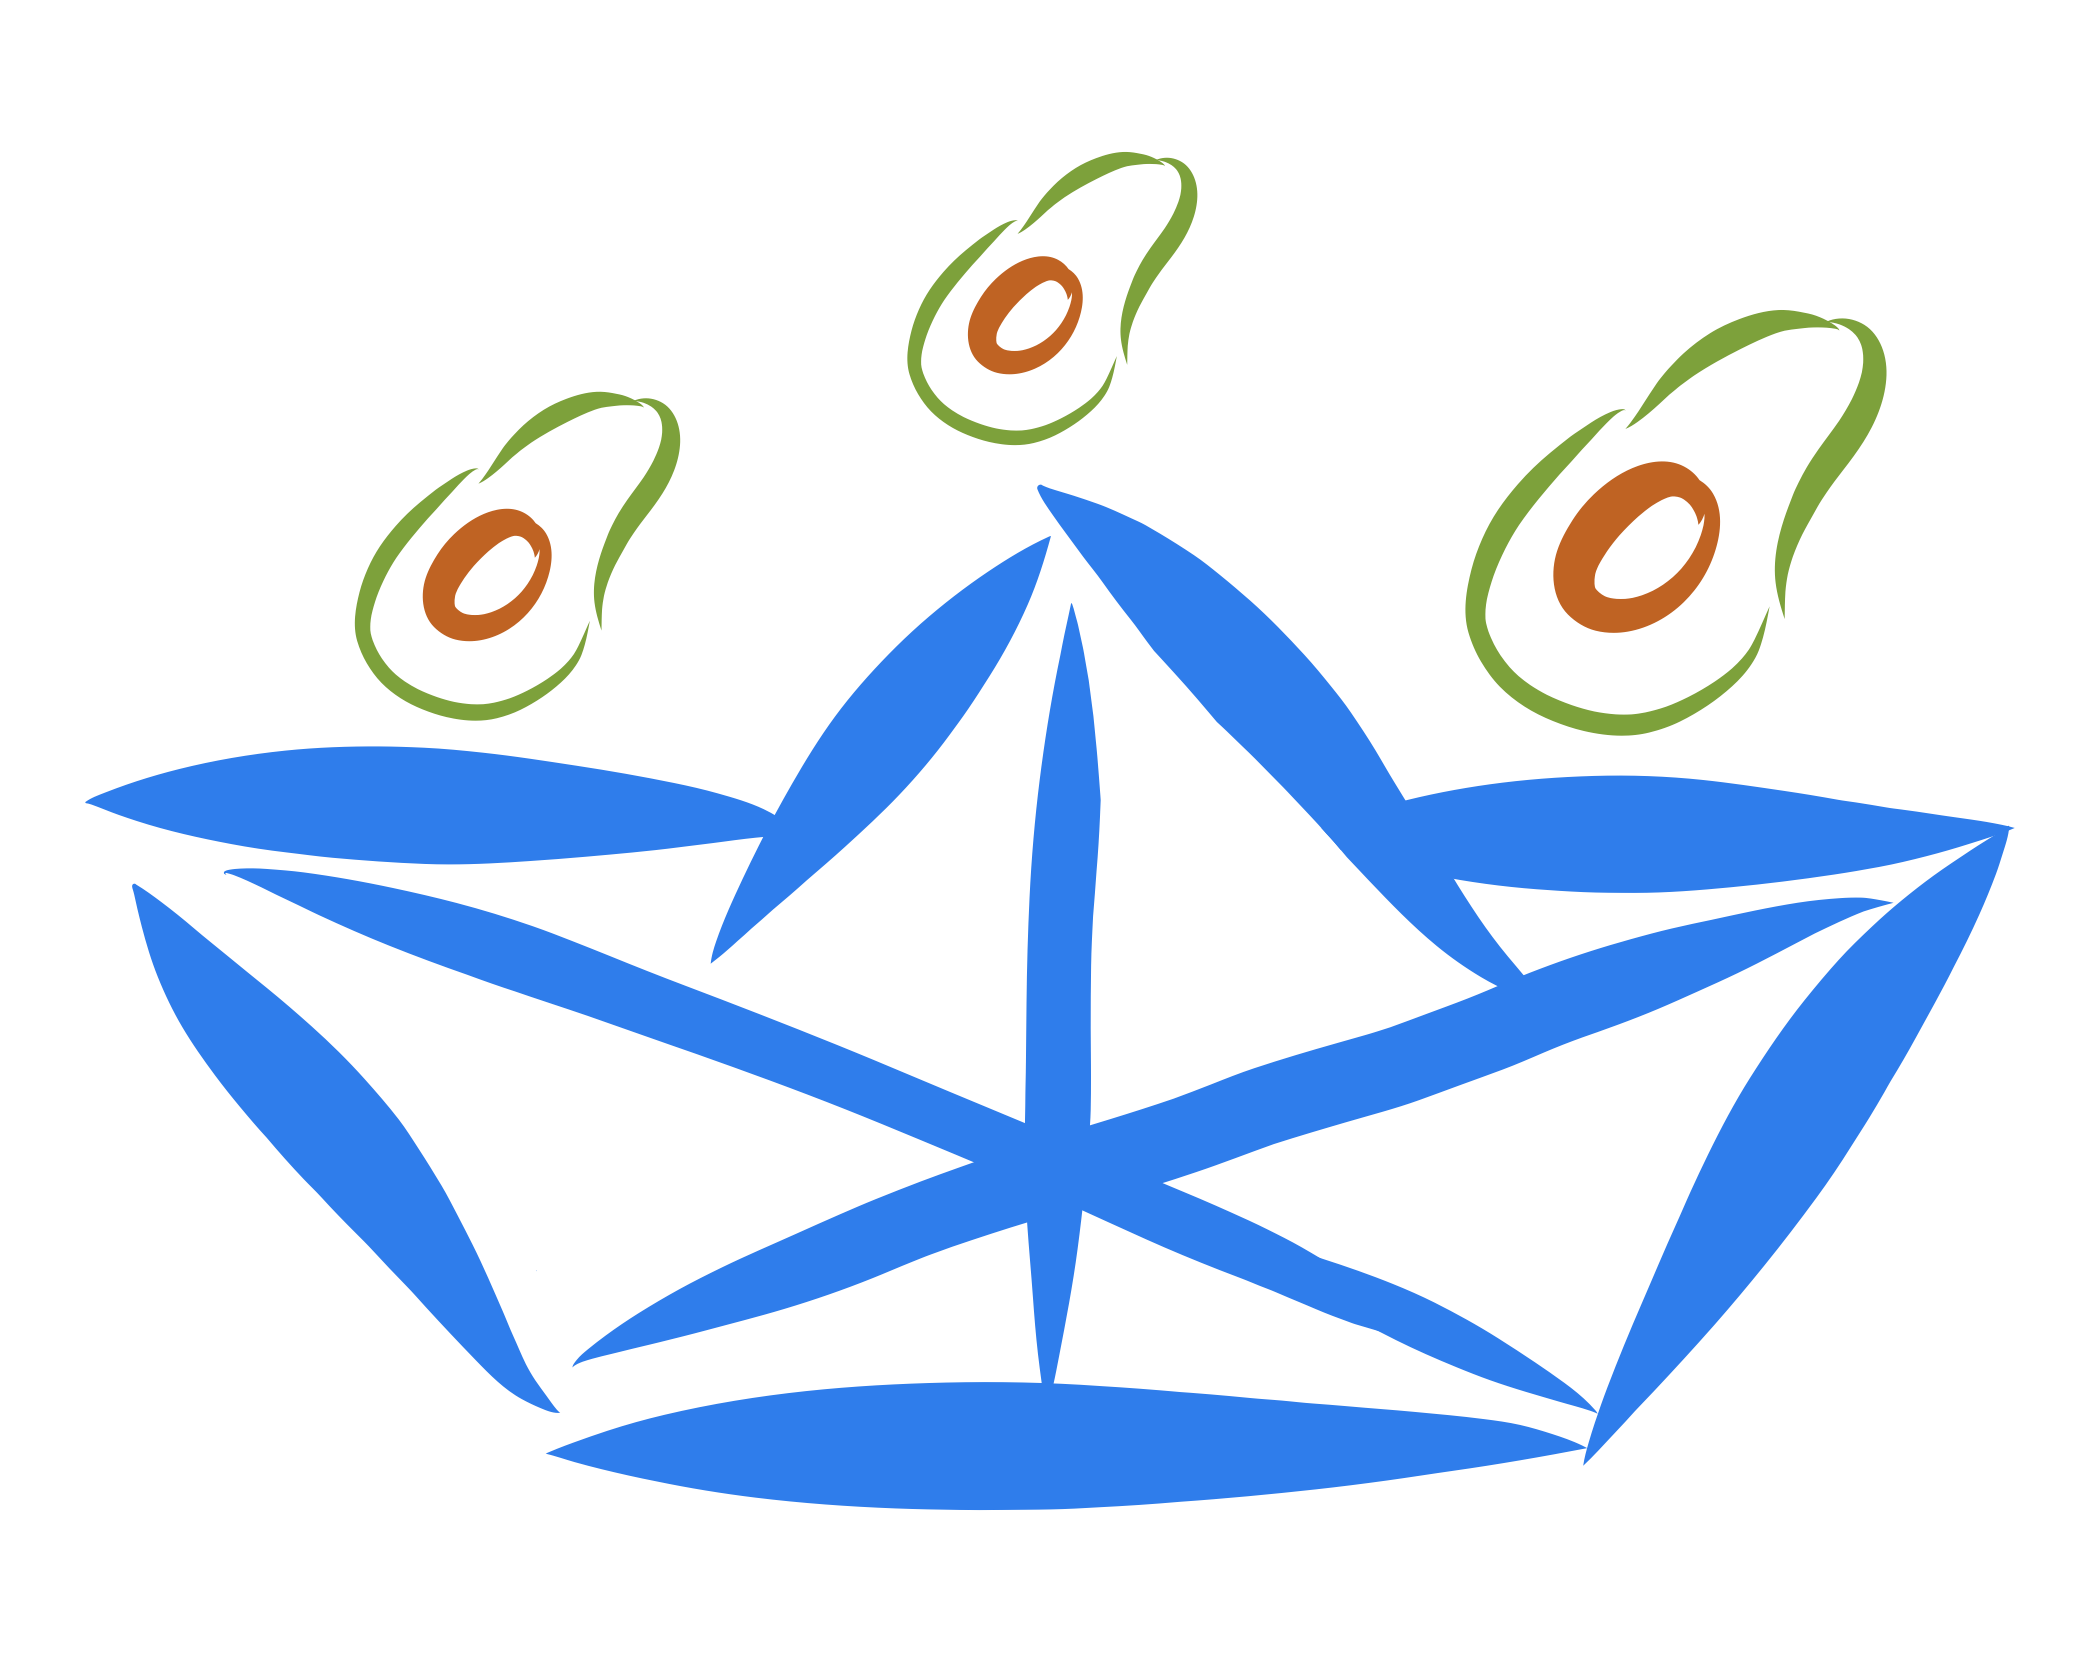 The Stream logo with avocados on it